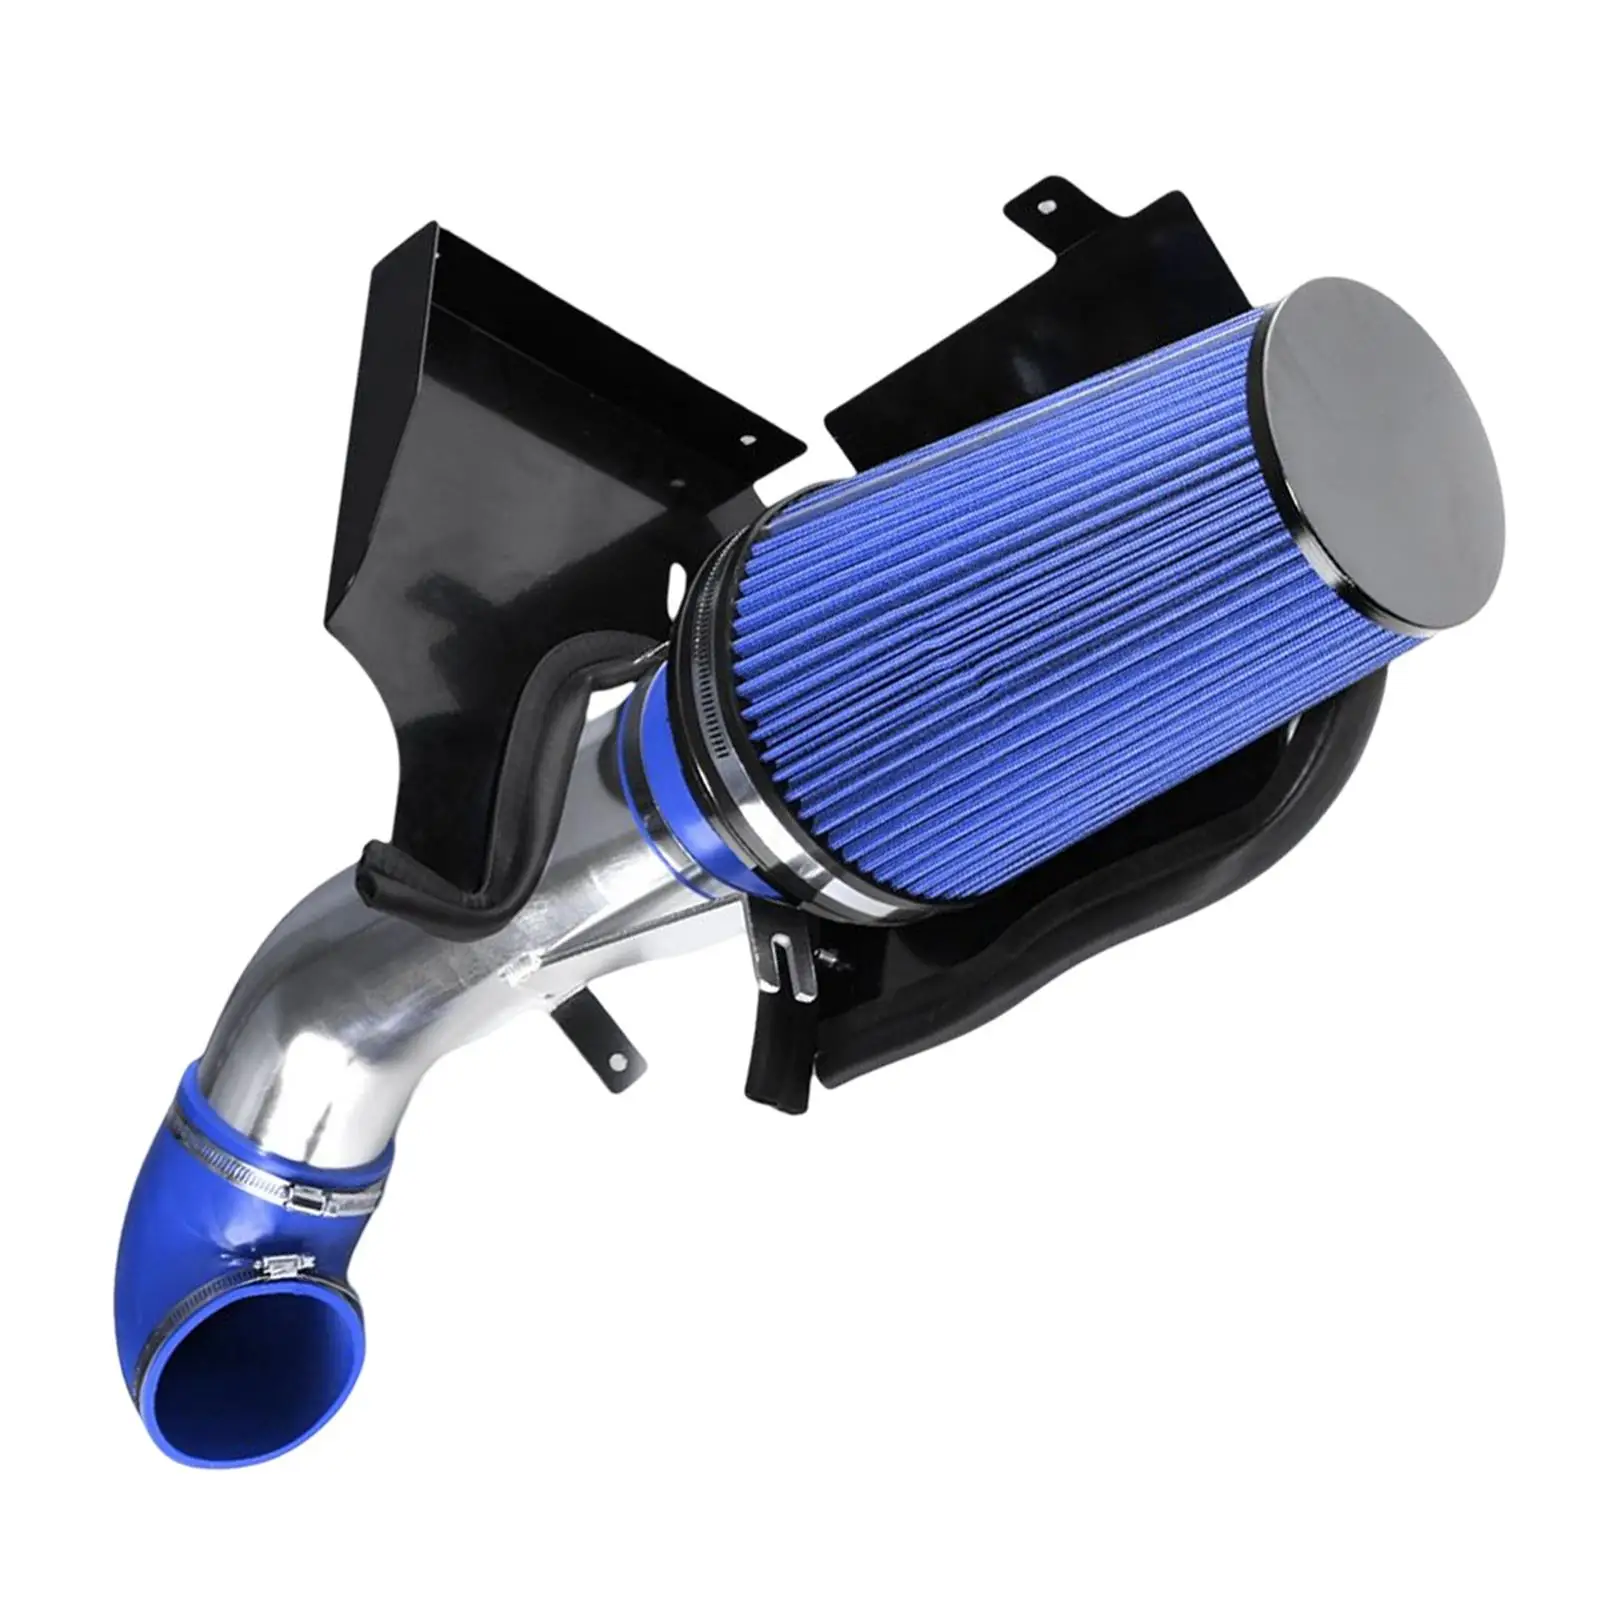 4 inch Cold Air Intake with Filter Fit for 1500 Replacement Accessories